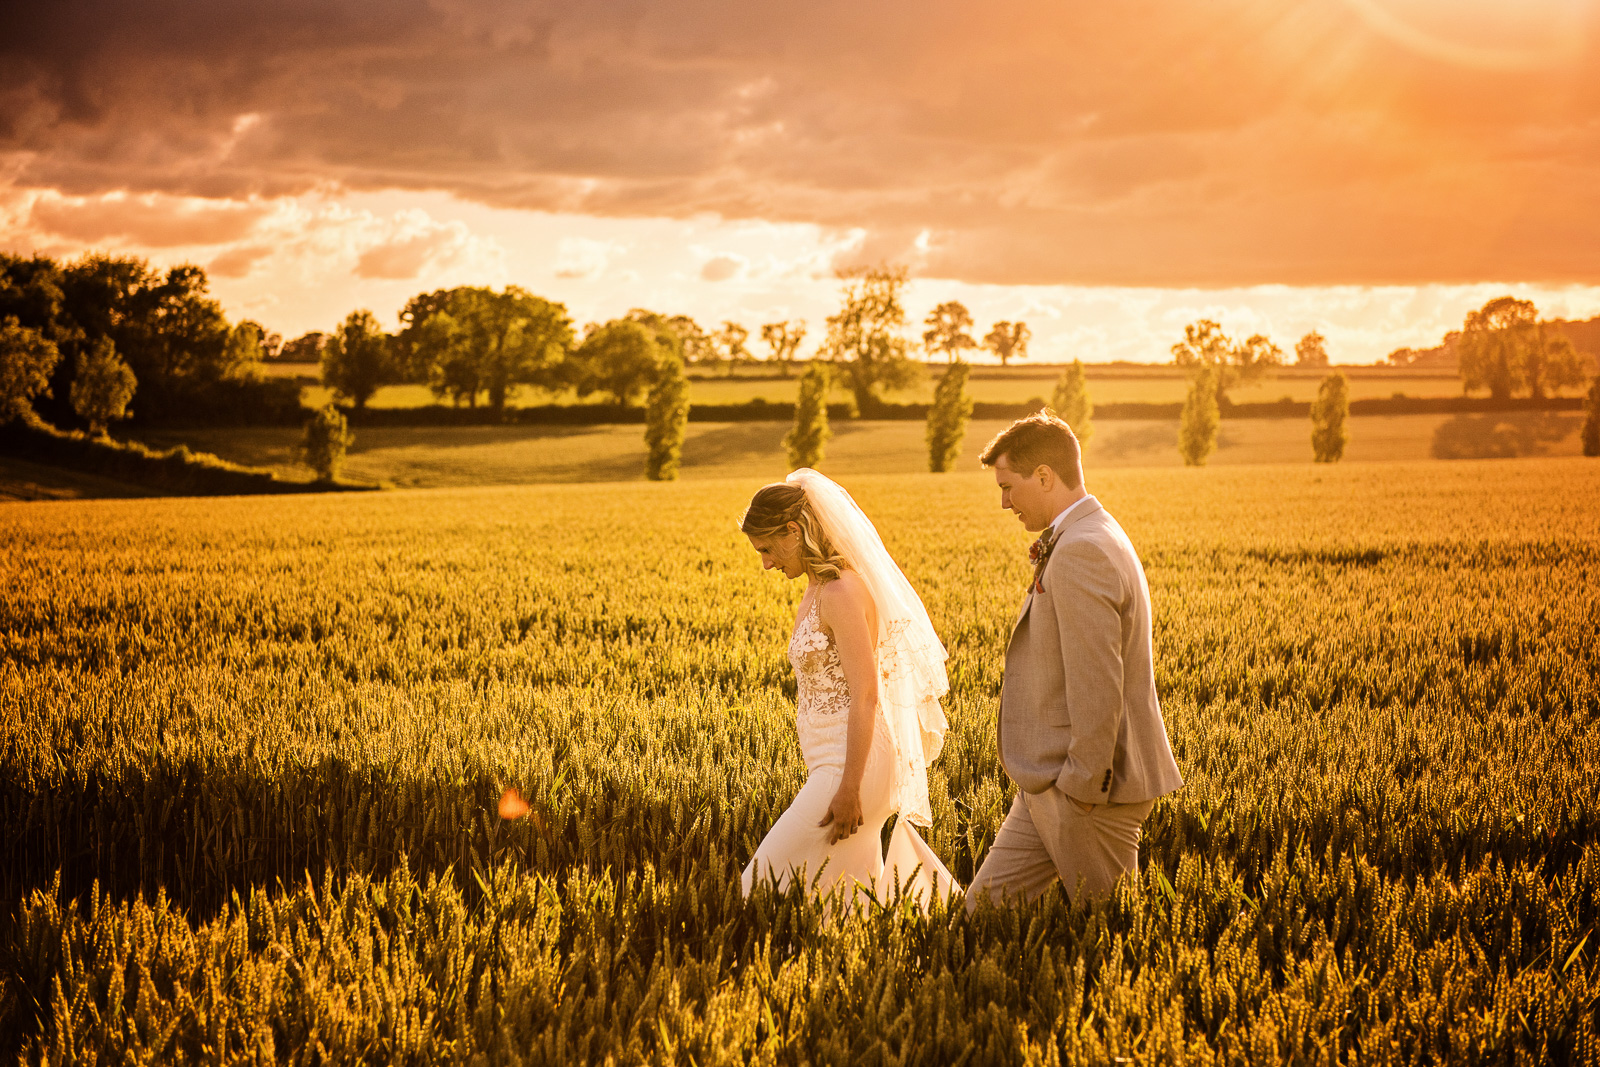 Bride & Groom walk through a wheat field with a impressive sunset behind them.  